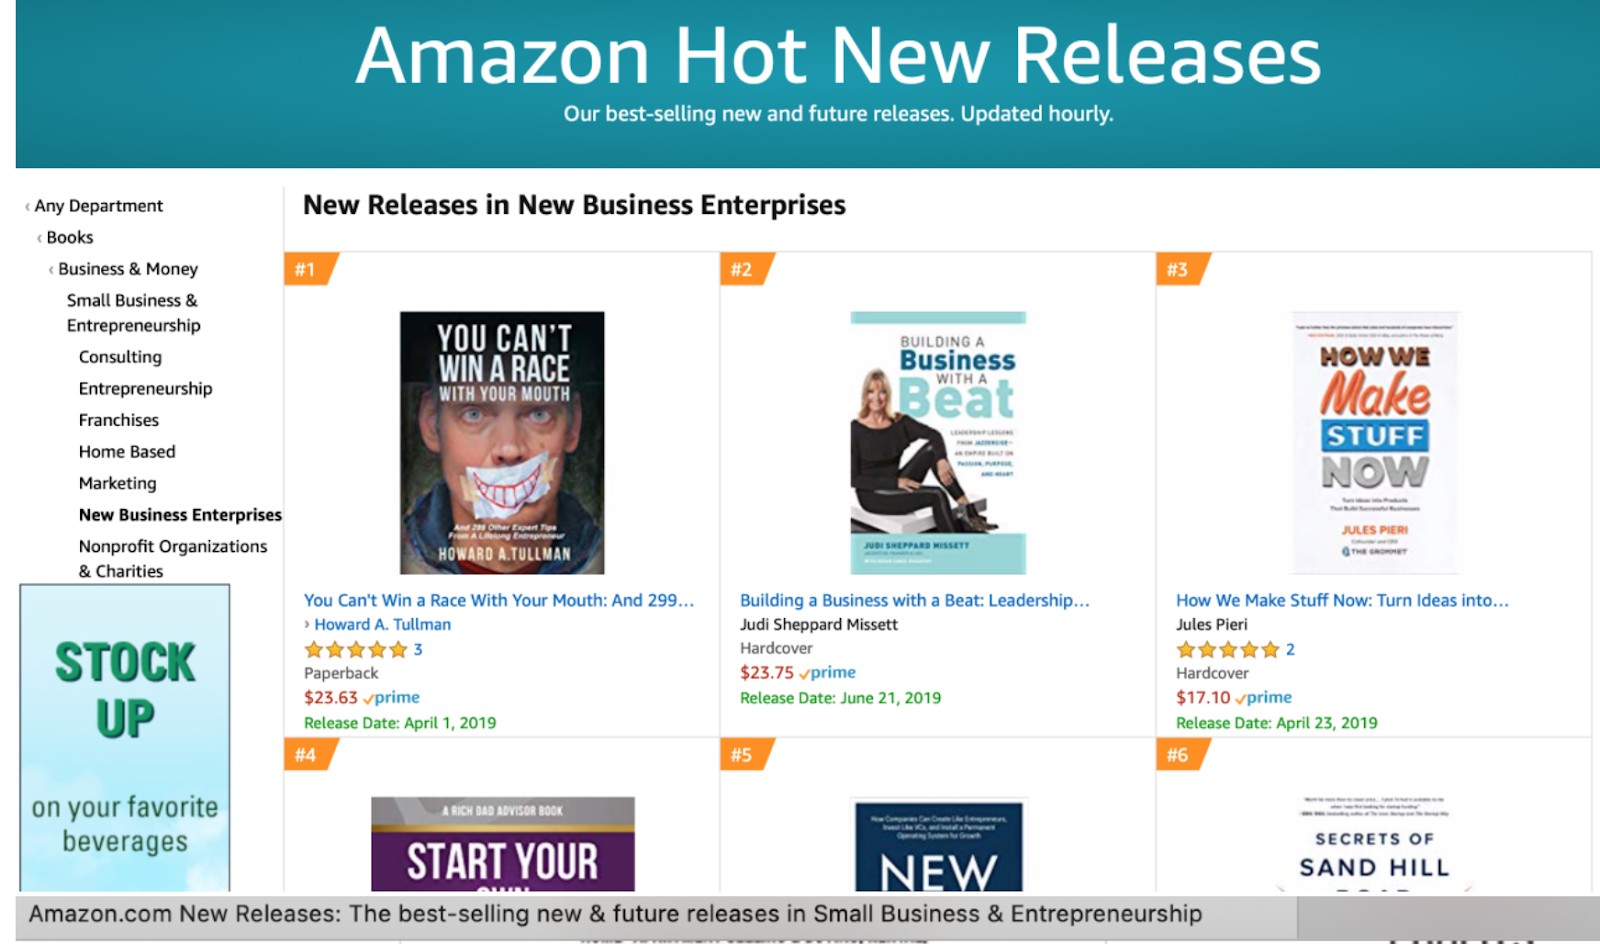 Hindsight : #1 IN AMAZON HOT NEW RELEASES